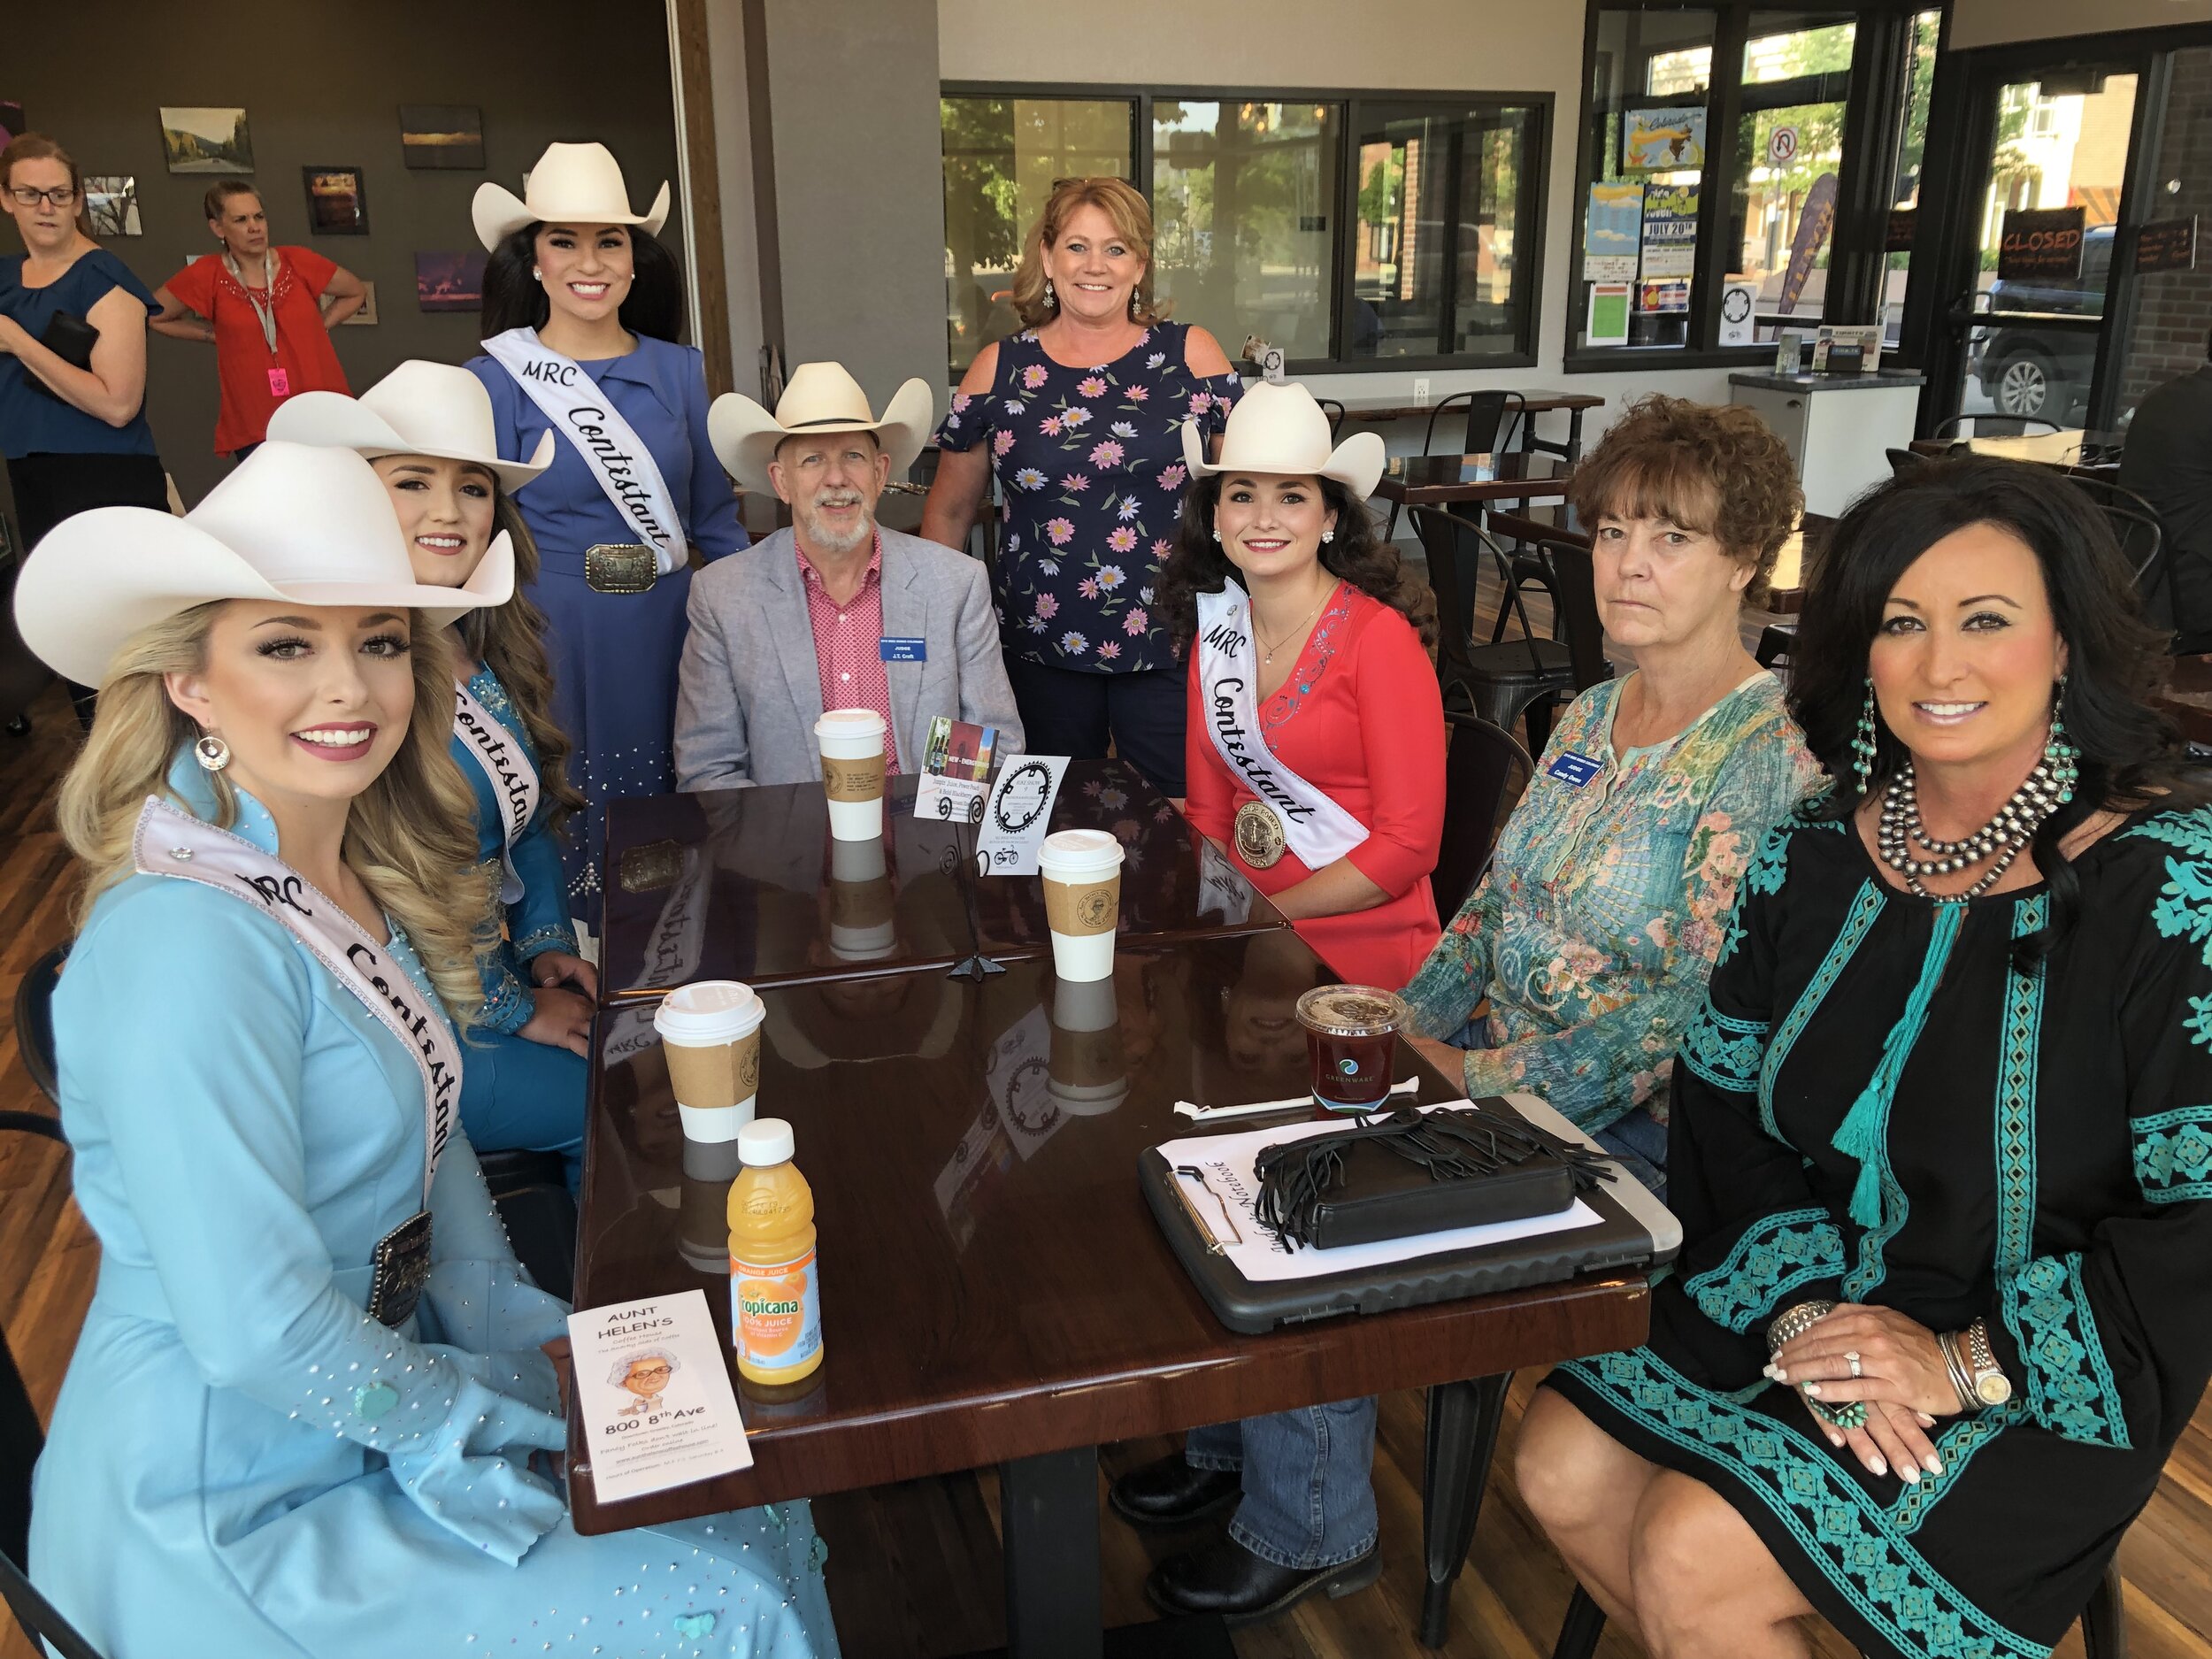 Miss Rodeo Picture of Contestants.jpg